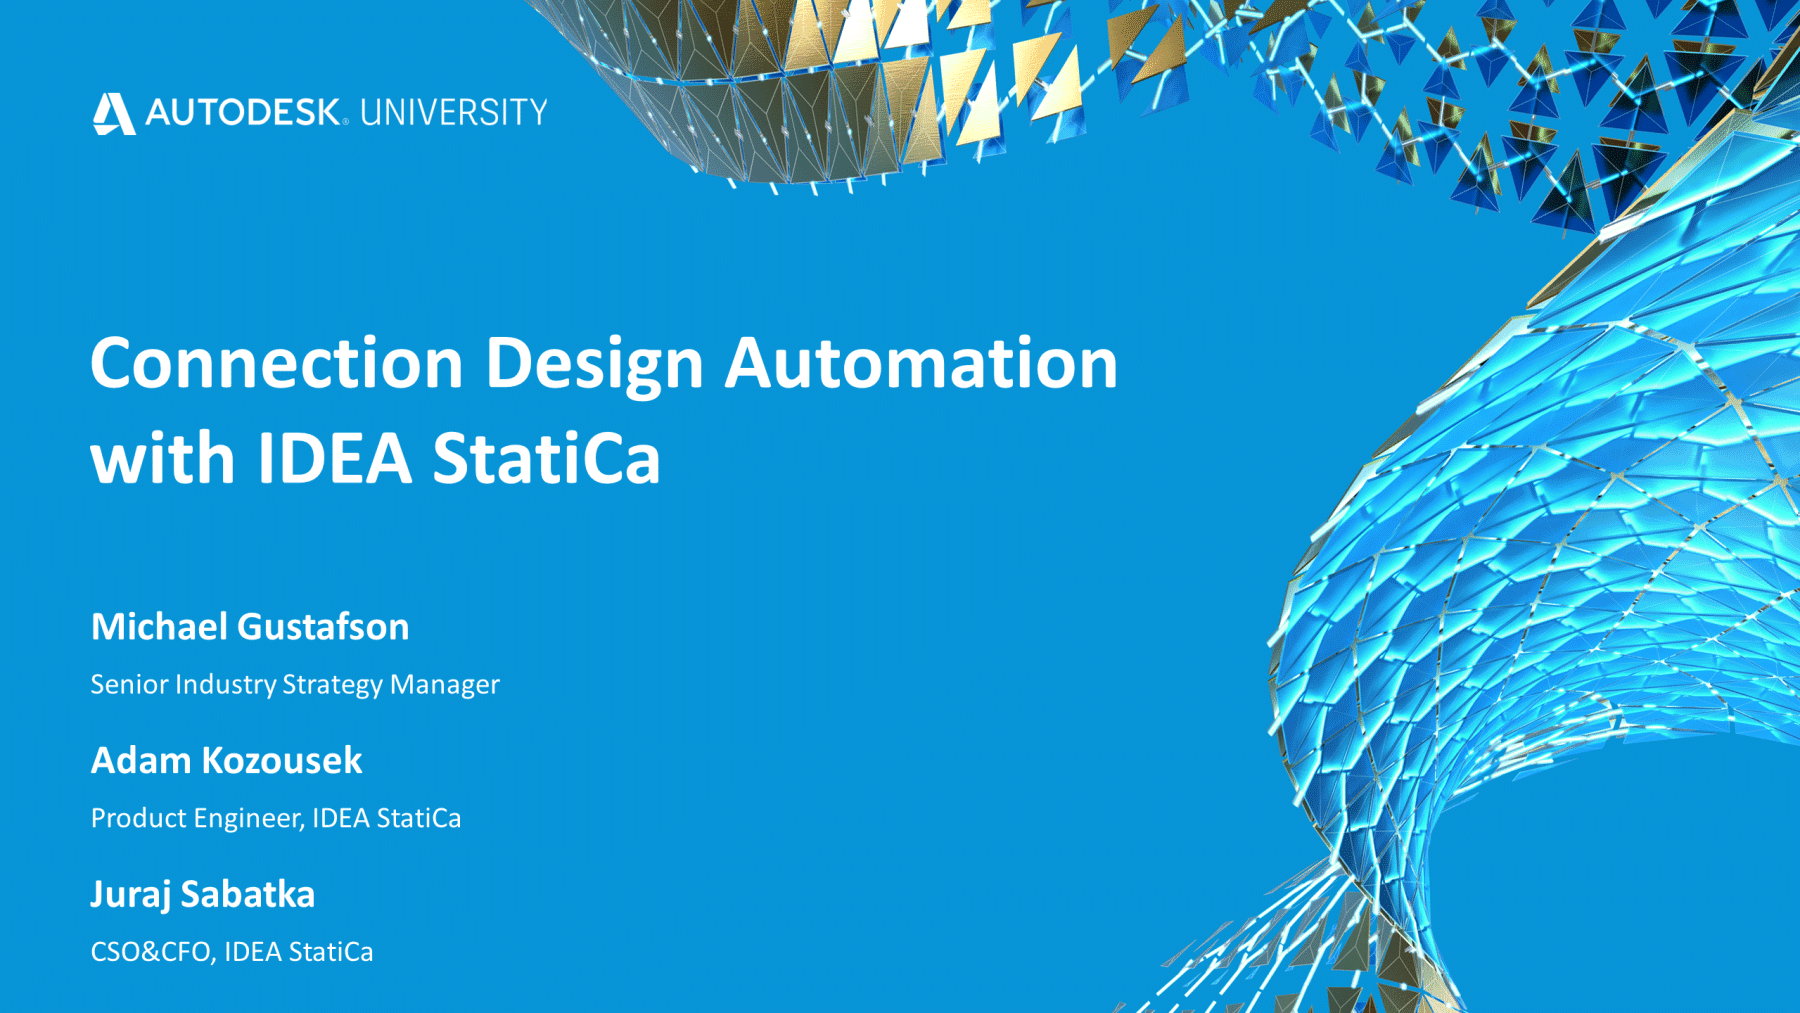 Connection Design Automation with IDEA StatiCa and Autodesk